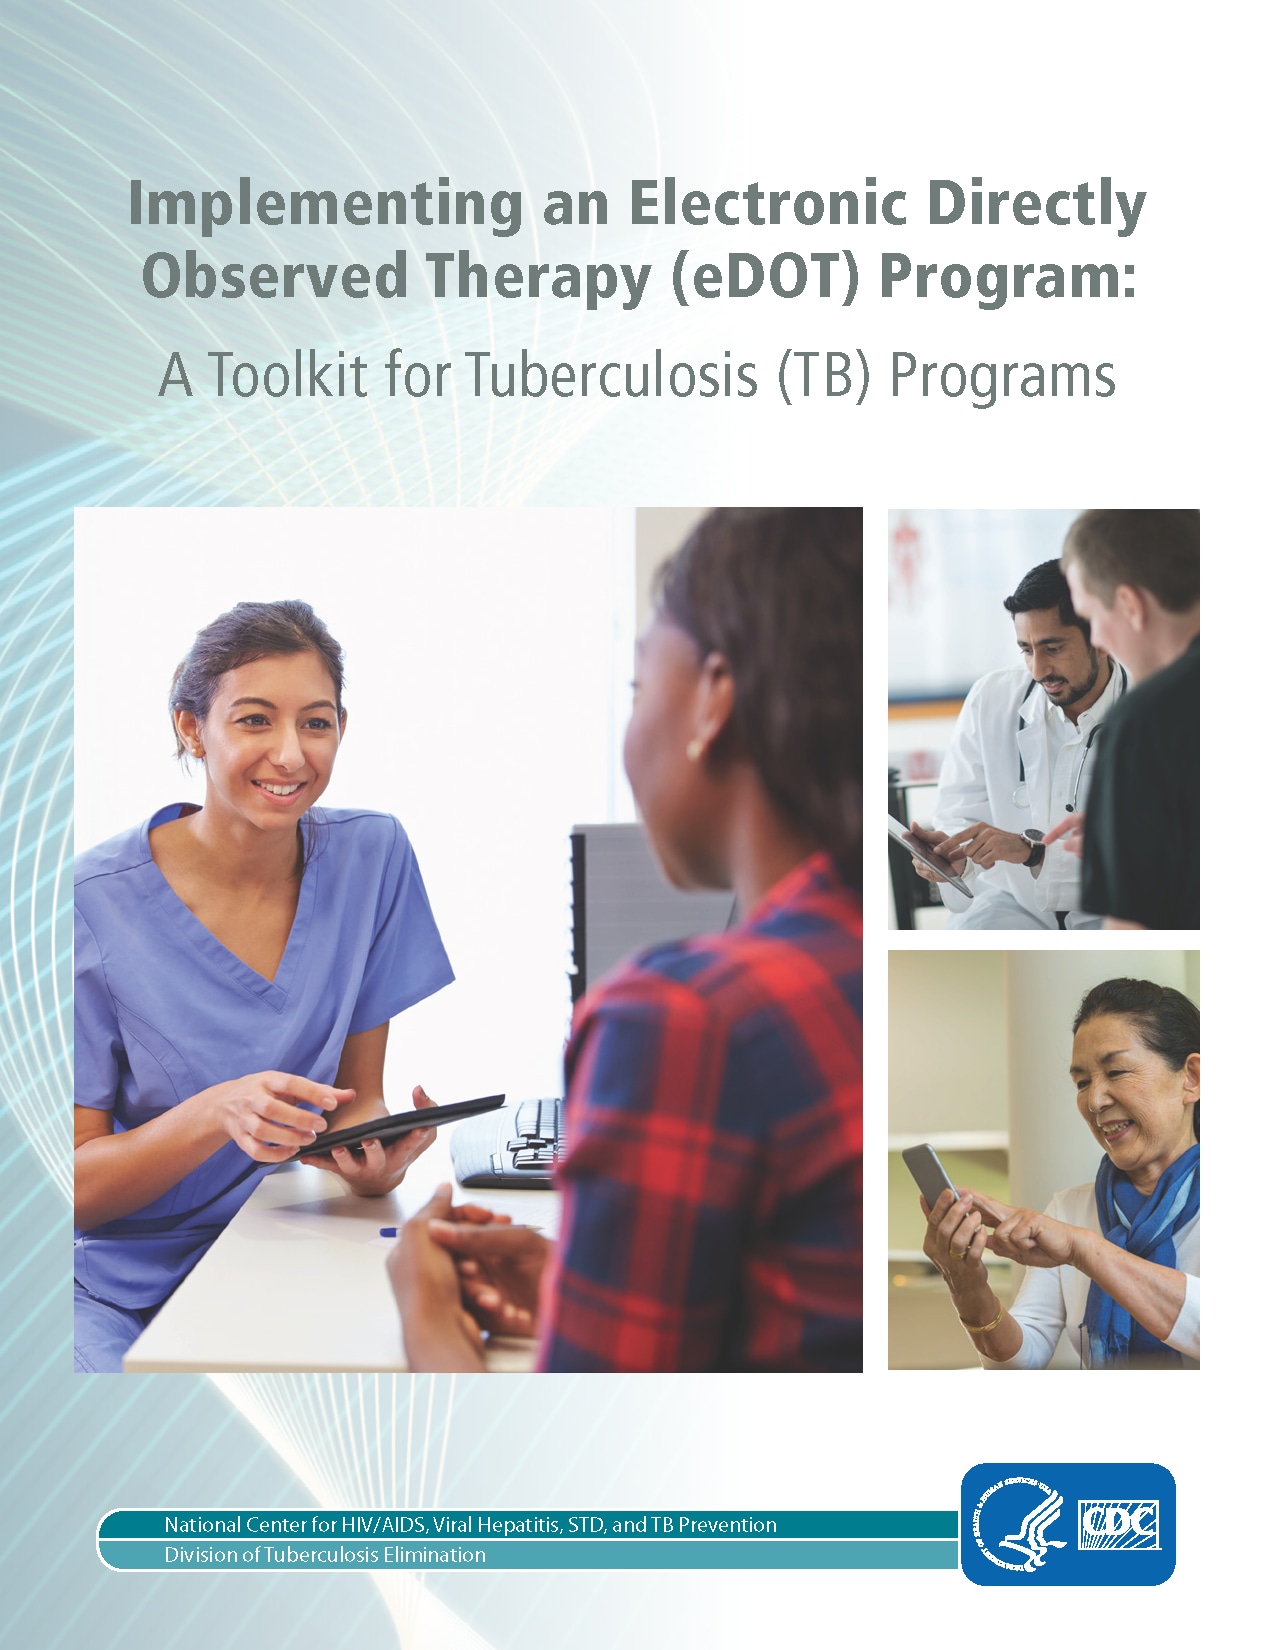 Implementing an Electronic Directly Observed Therapy Program Toolkit